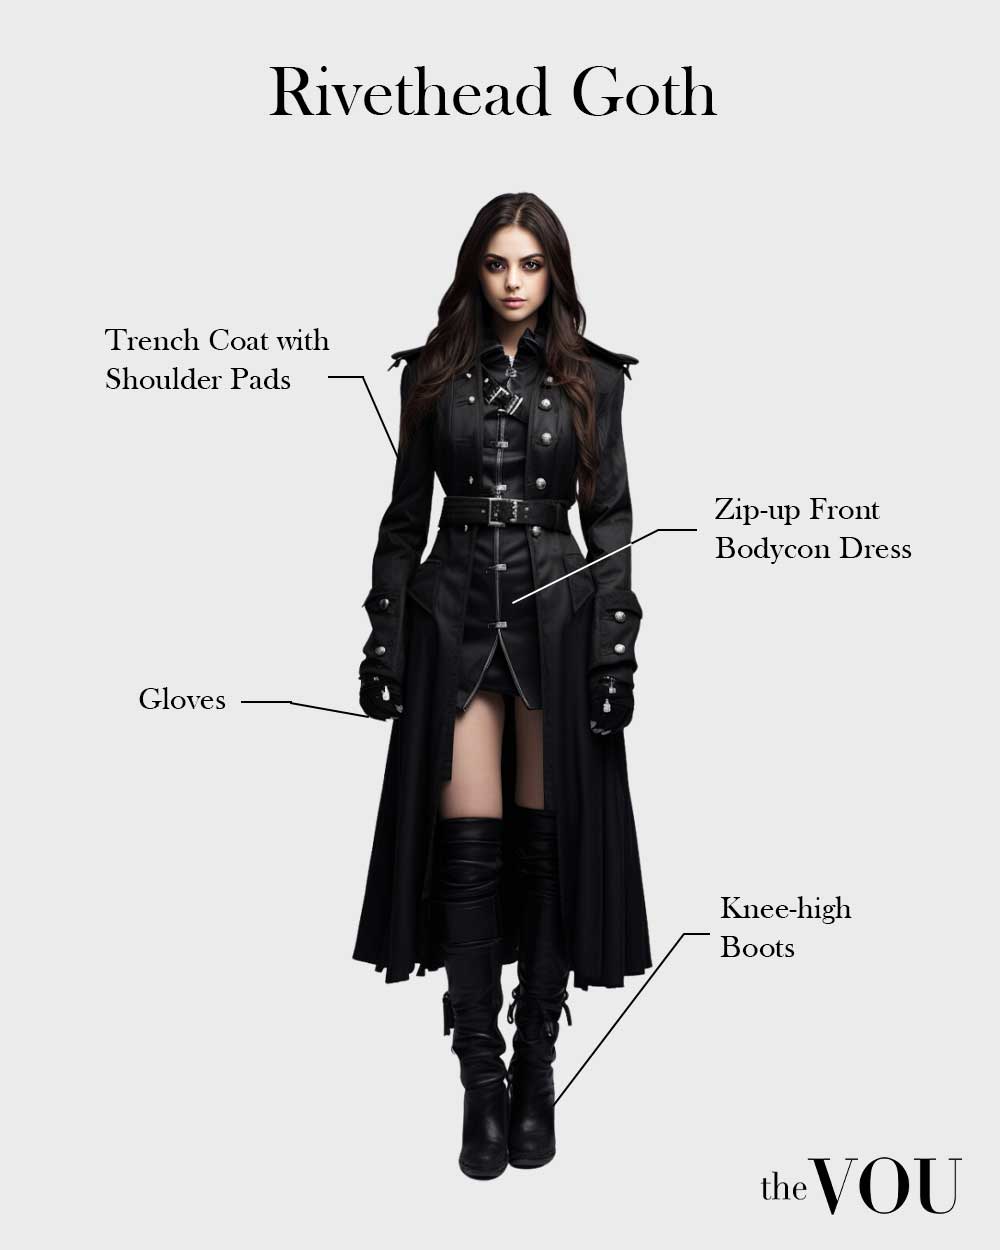 Rivethead goth outfit elements